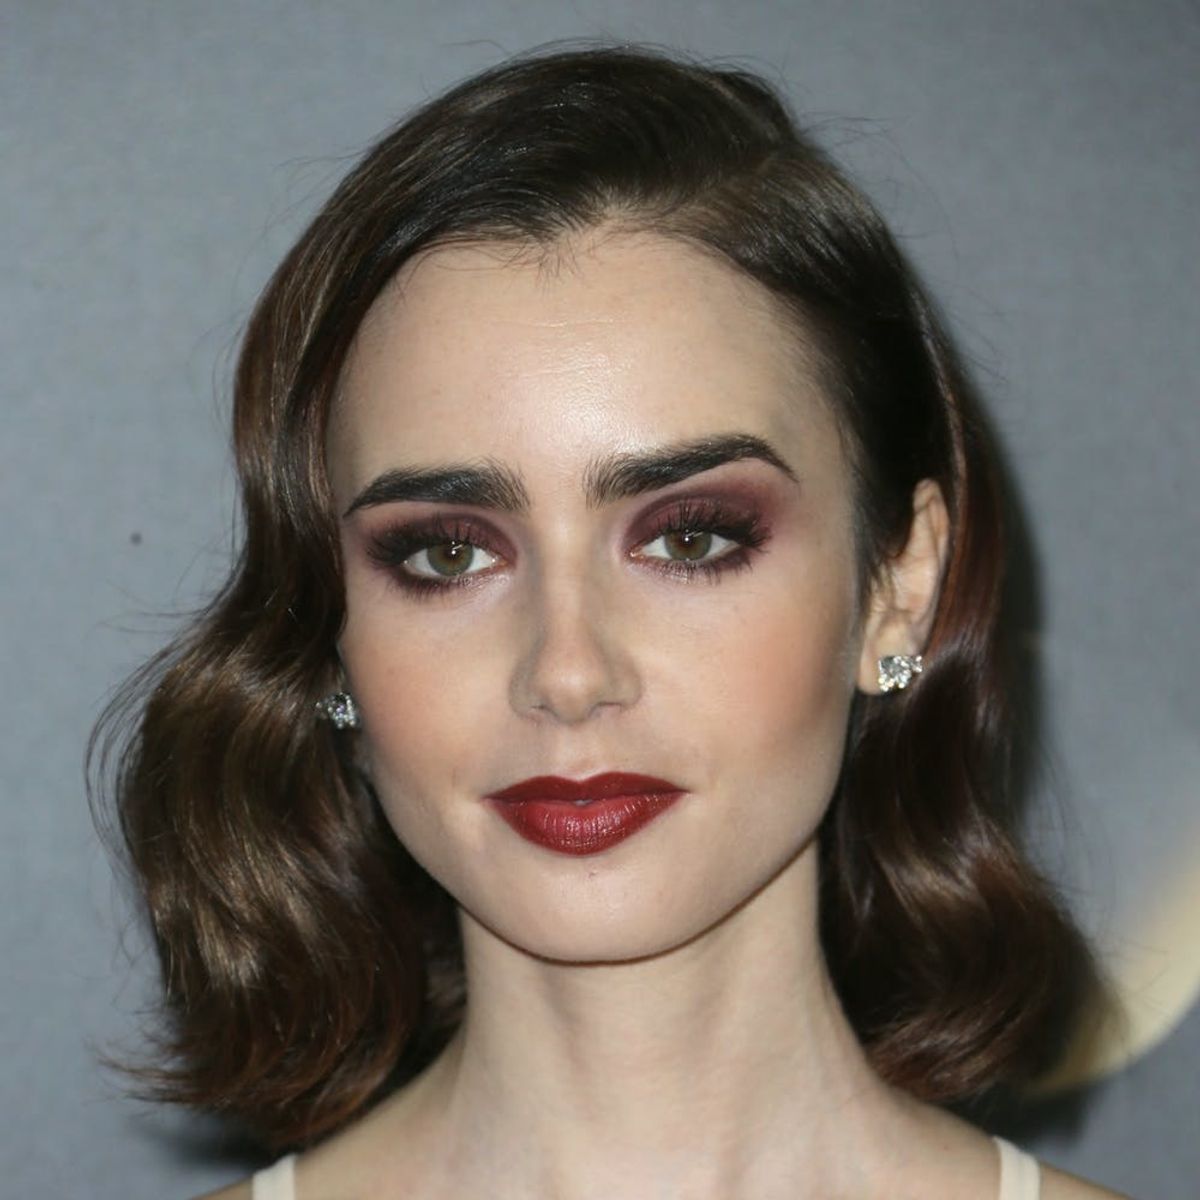 Lily Collins Just Channeled Belle from Beauty & the Beast on the Red Carpet